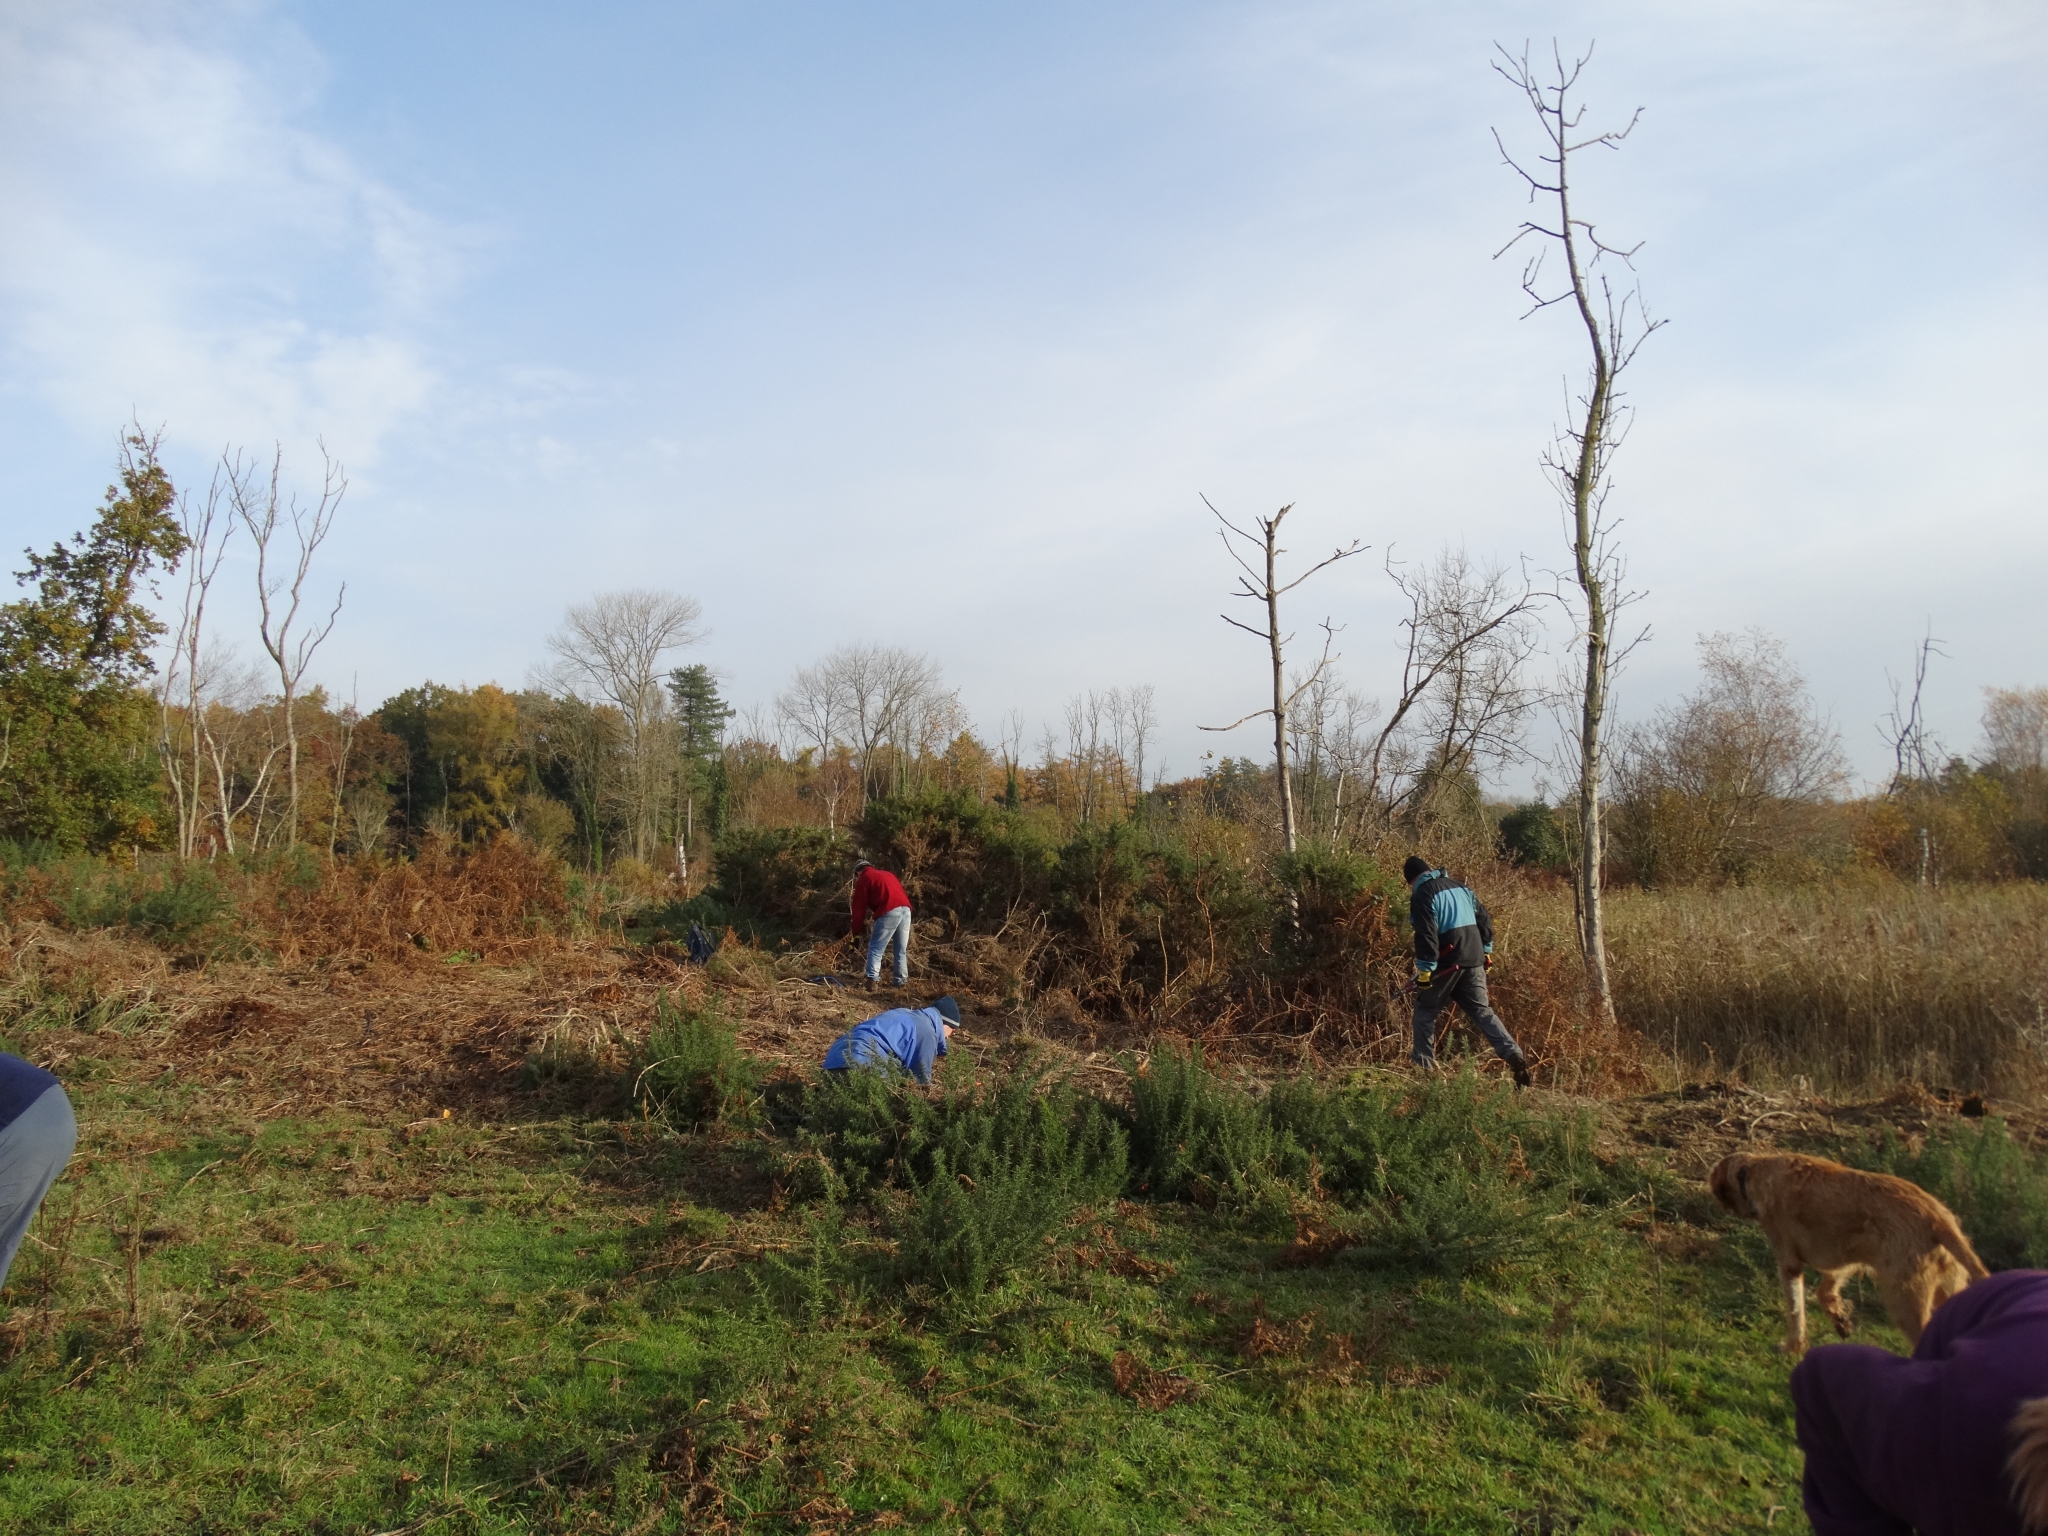 A photo from the FoTF Conservation Event - November 2019 - Gorse Clearance at Hockham Hills & Holes : Volunteer tackle a Gorse bush